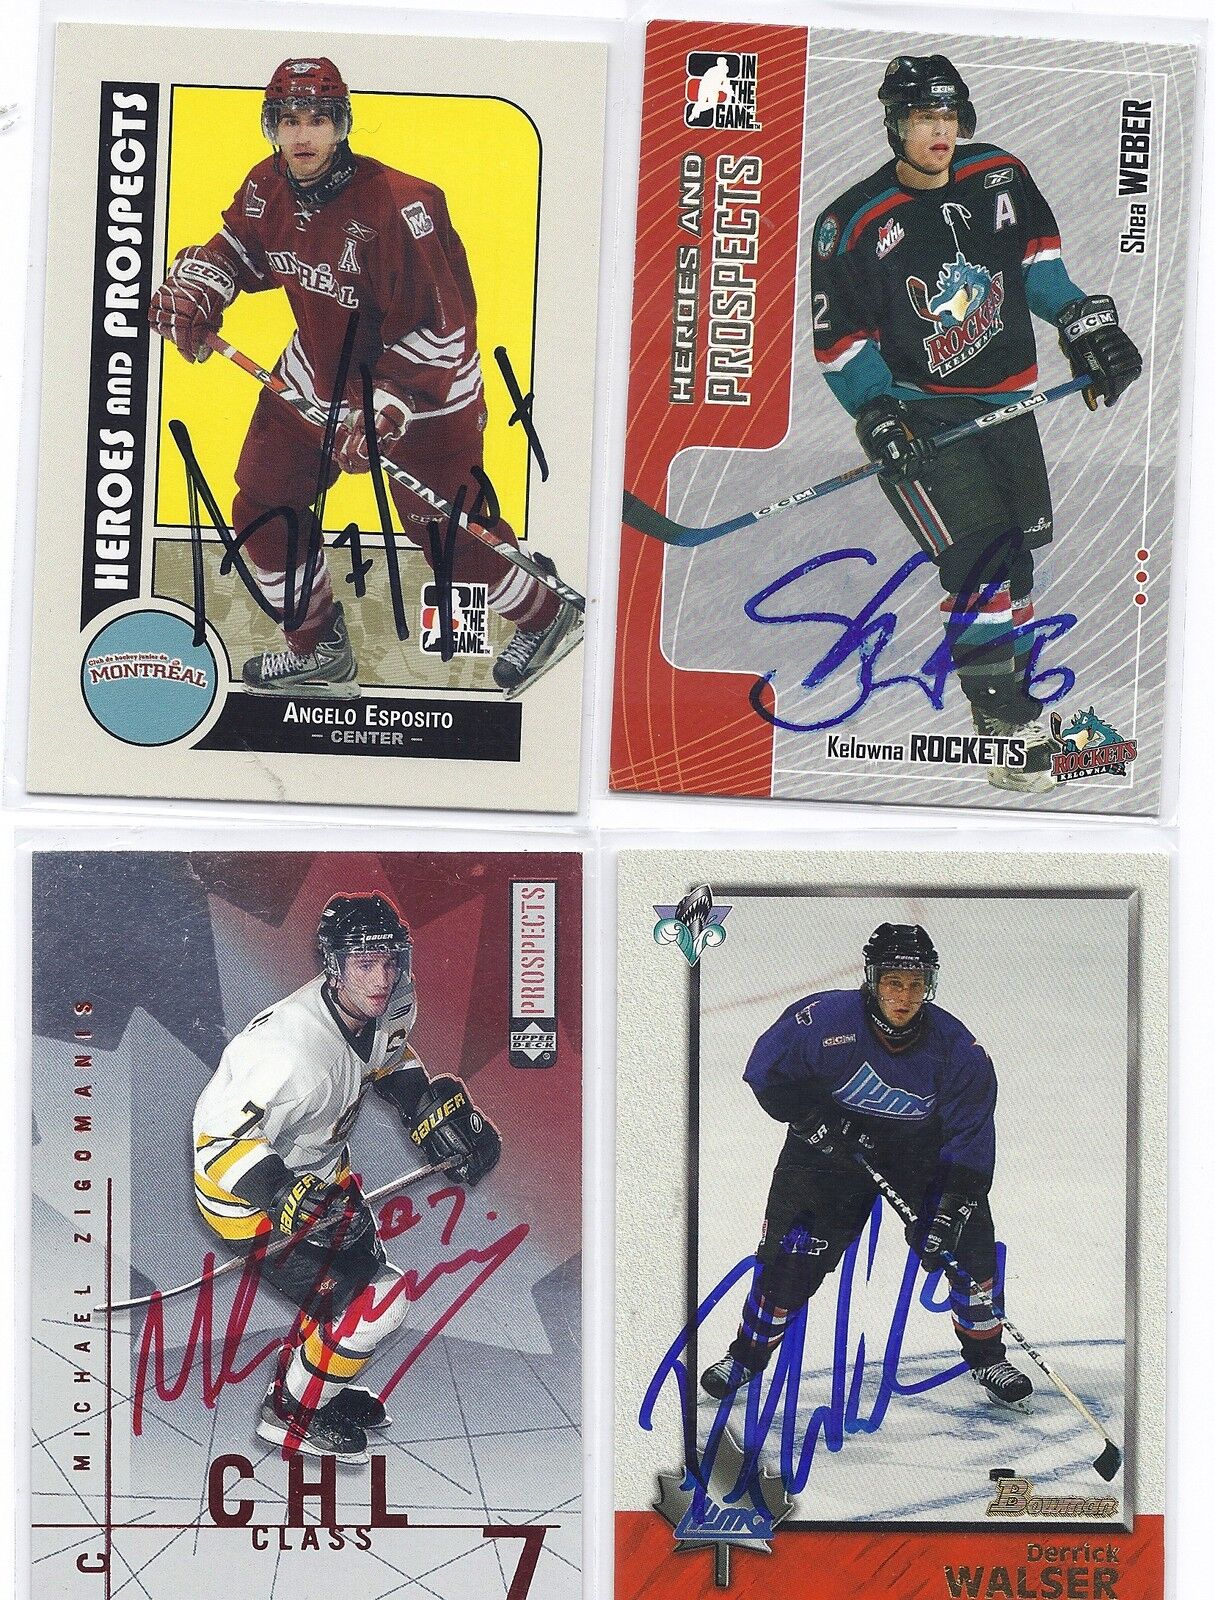 Angelo Esposito Signed / Autographed Hockey Card Montreal Jr. 2008 ITG 